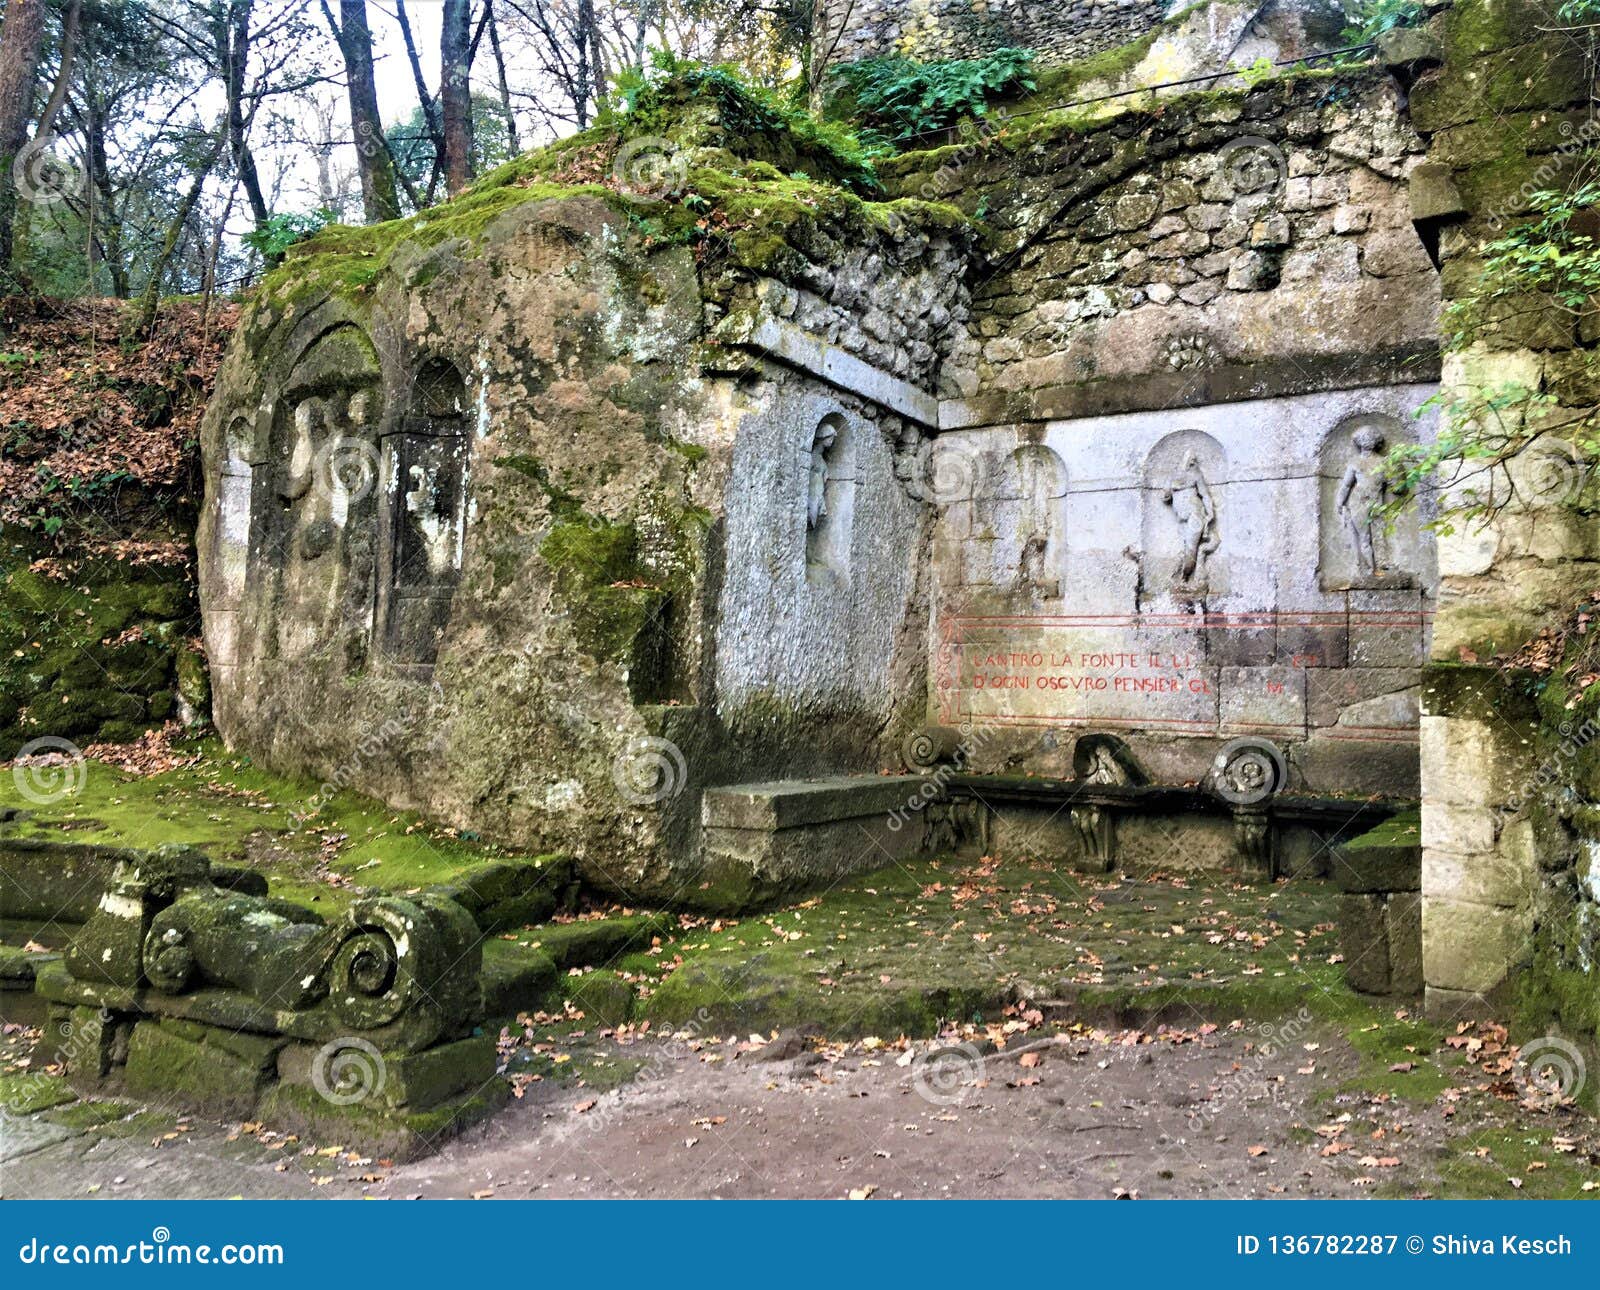 park of the monsters, sacred grove, garden of bomarzo. three graces and the nymphaeum